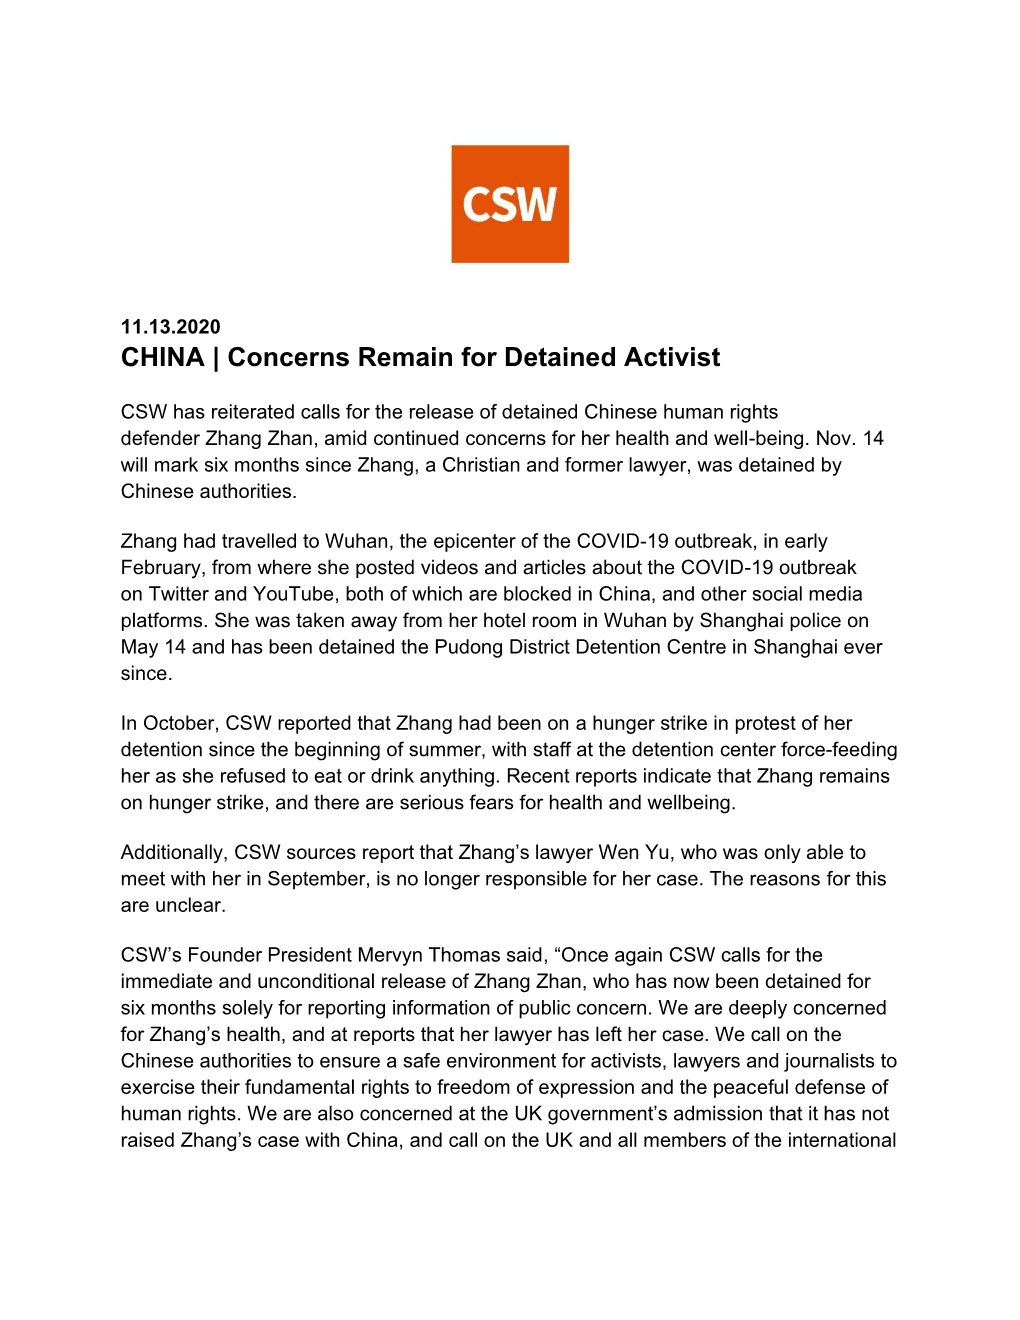 11.13.2020 CHINA | Concerns Remain for Detained Activist